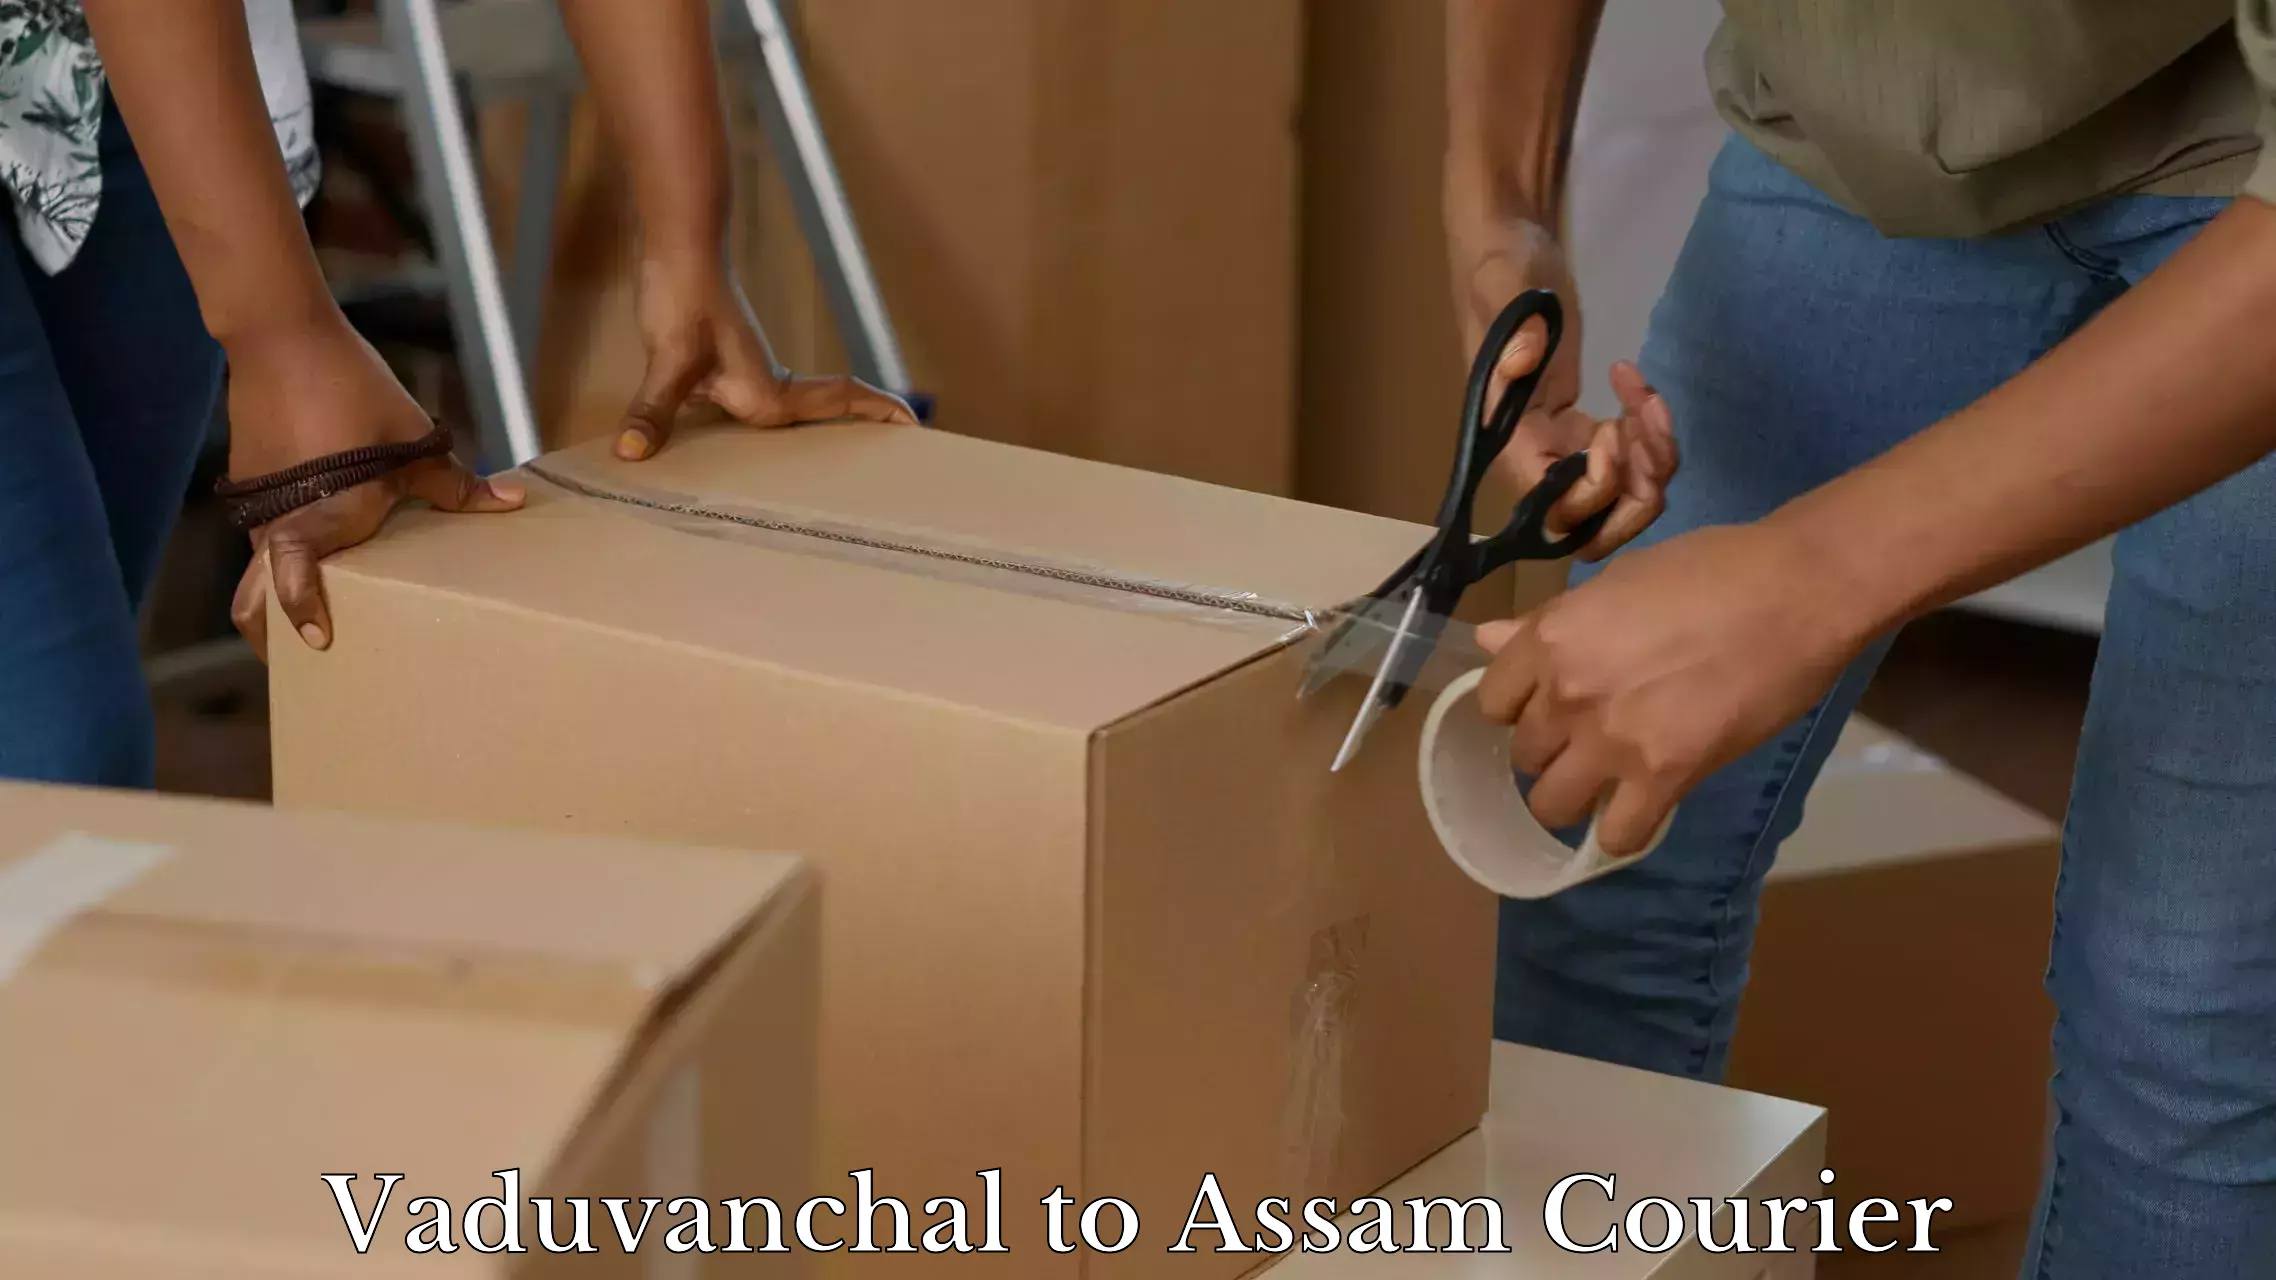 Baggage shipping experience Vaduvanchal to Assam